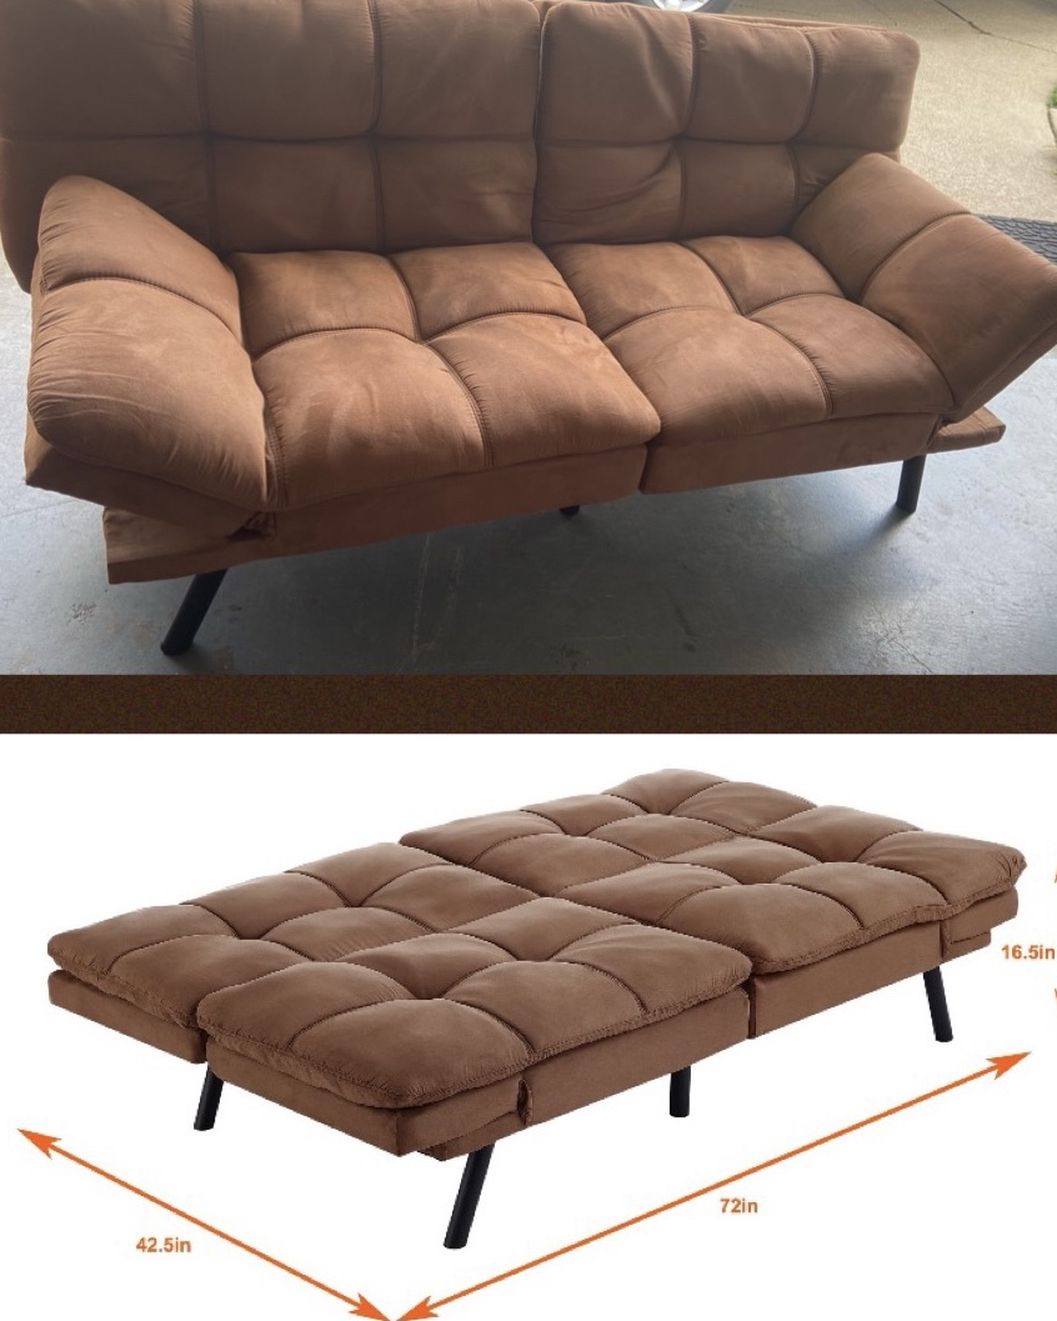 MEMORY FOAM CAMEL SUEDE FUTON AND FOLDABLE BED IN-ONE 